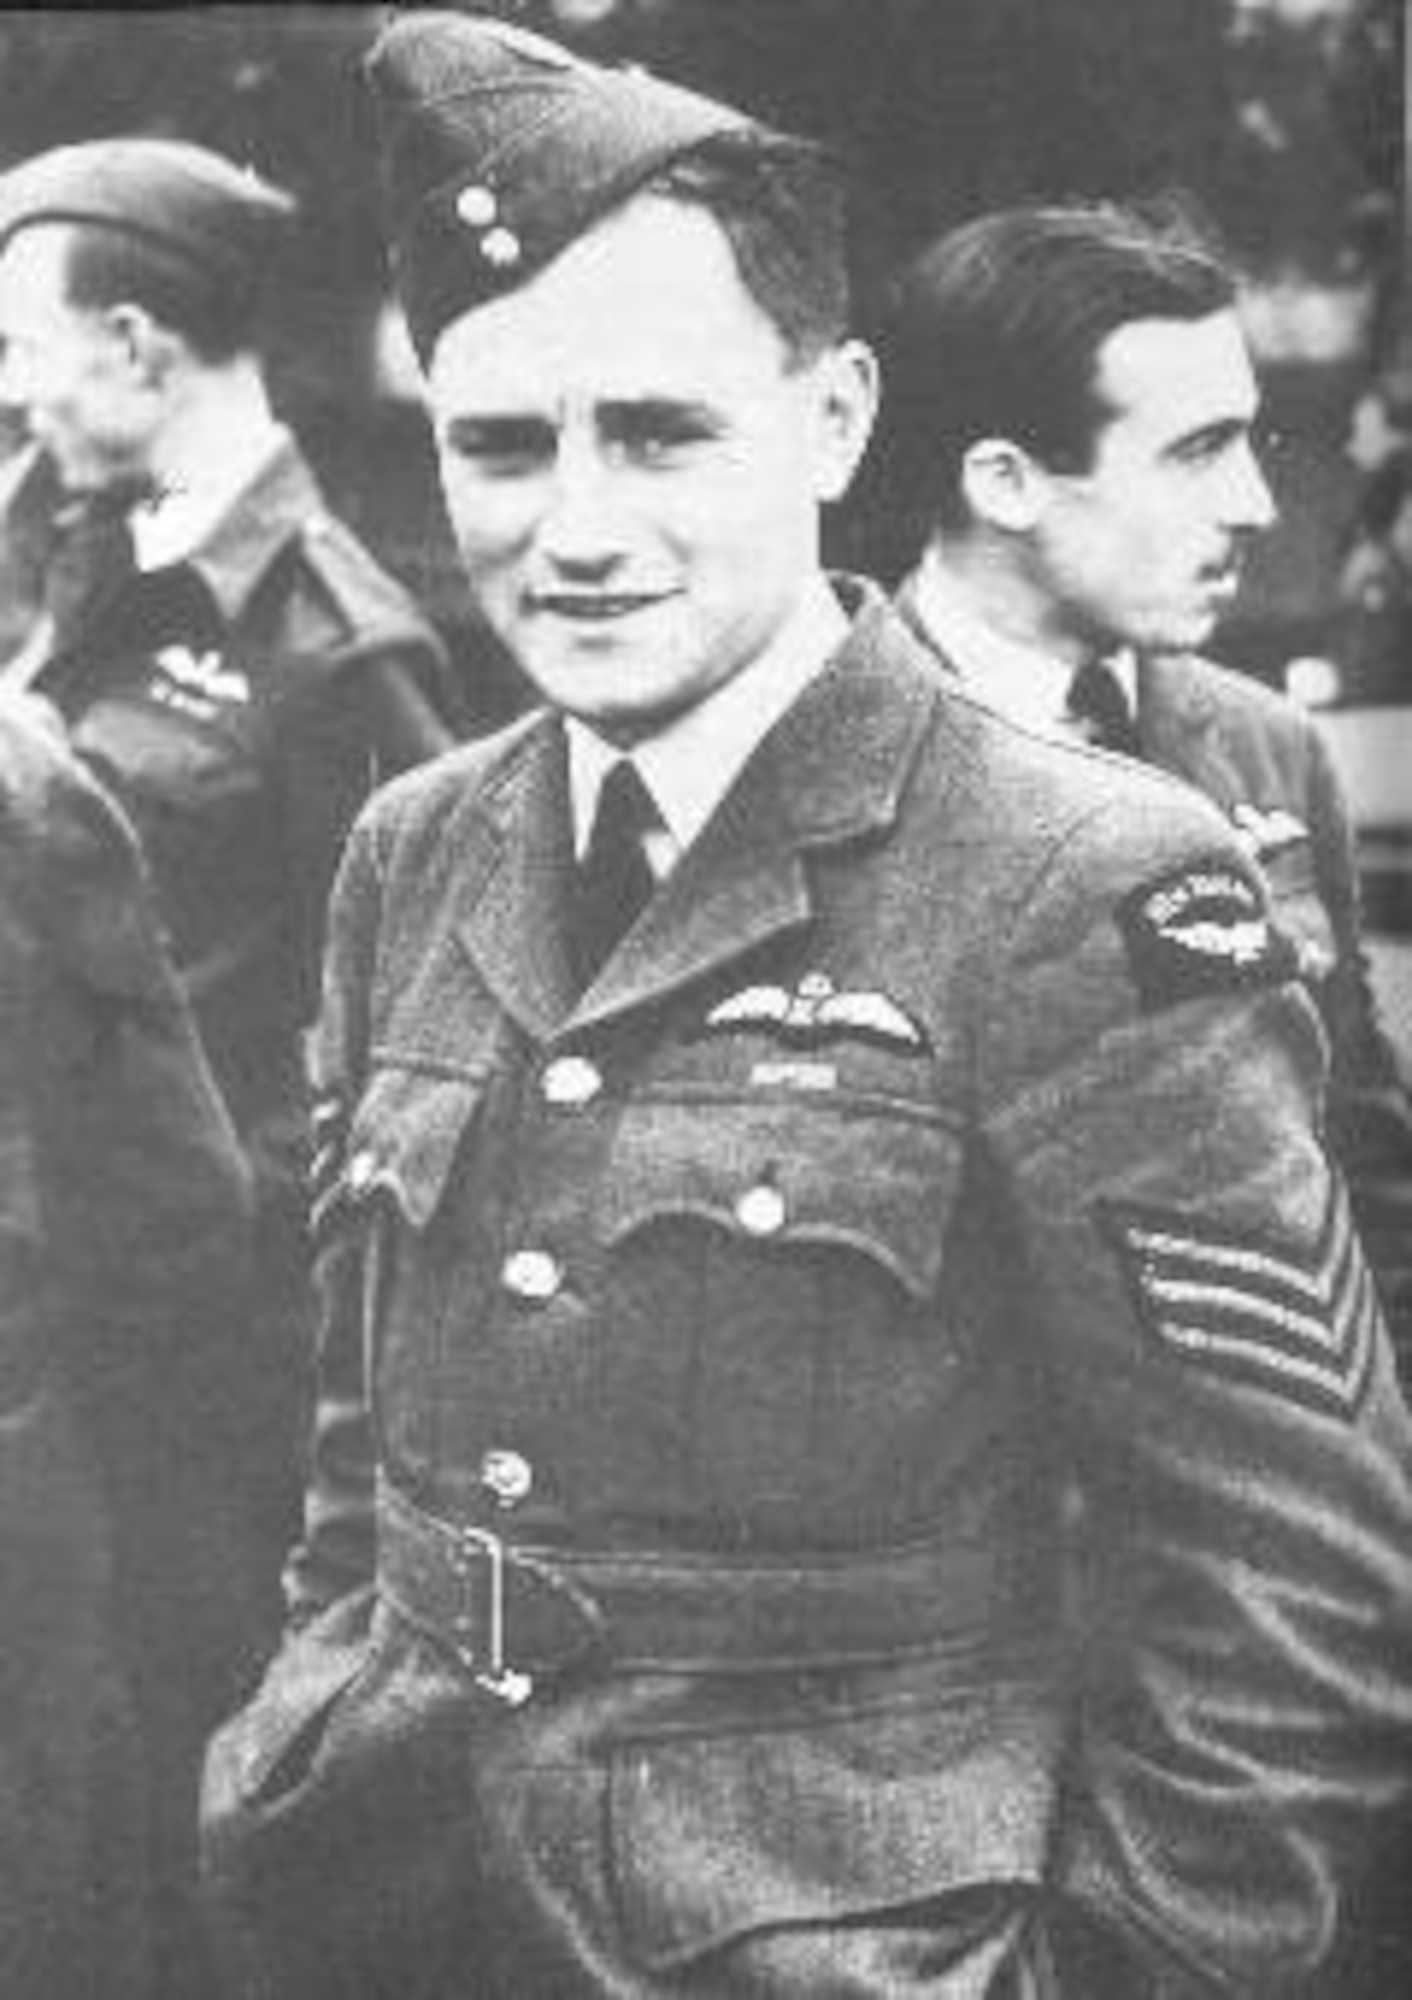 ROYAL AIR FORCE FELTWELL, England -- Photo of Sgt. James A. Ward, the first New Zealander awarded the Victoria Cross; the British equivalent of the Medal of Honor. Sergeant Ward was stationed at RAF Feltwell with the Royal New Zealand Air Force No. 75 Squadron during World War II. He was awarded the medal for his heroic actions on July 7, 1941, when his Wellington bomber caught fire from an enemy attack. (Courtesy photo)